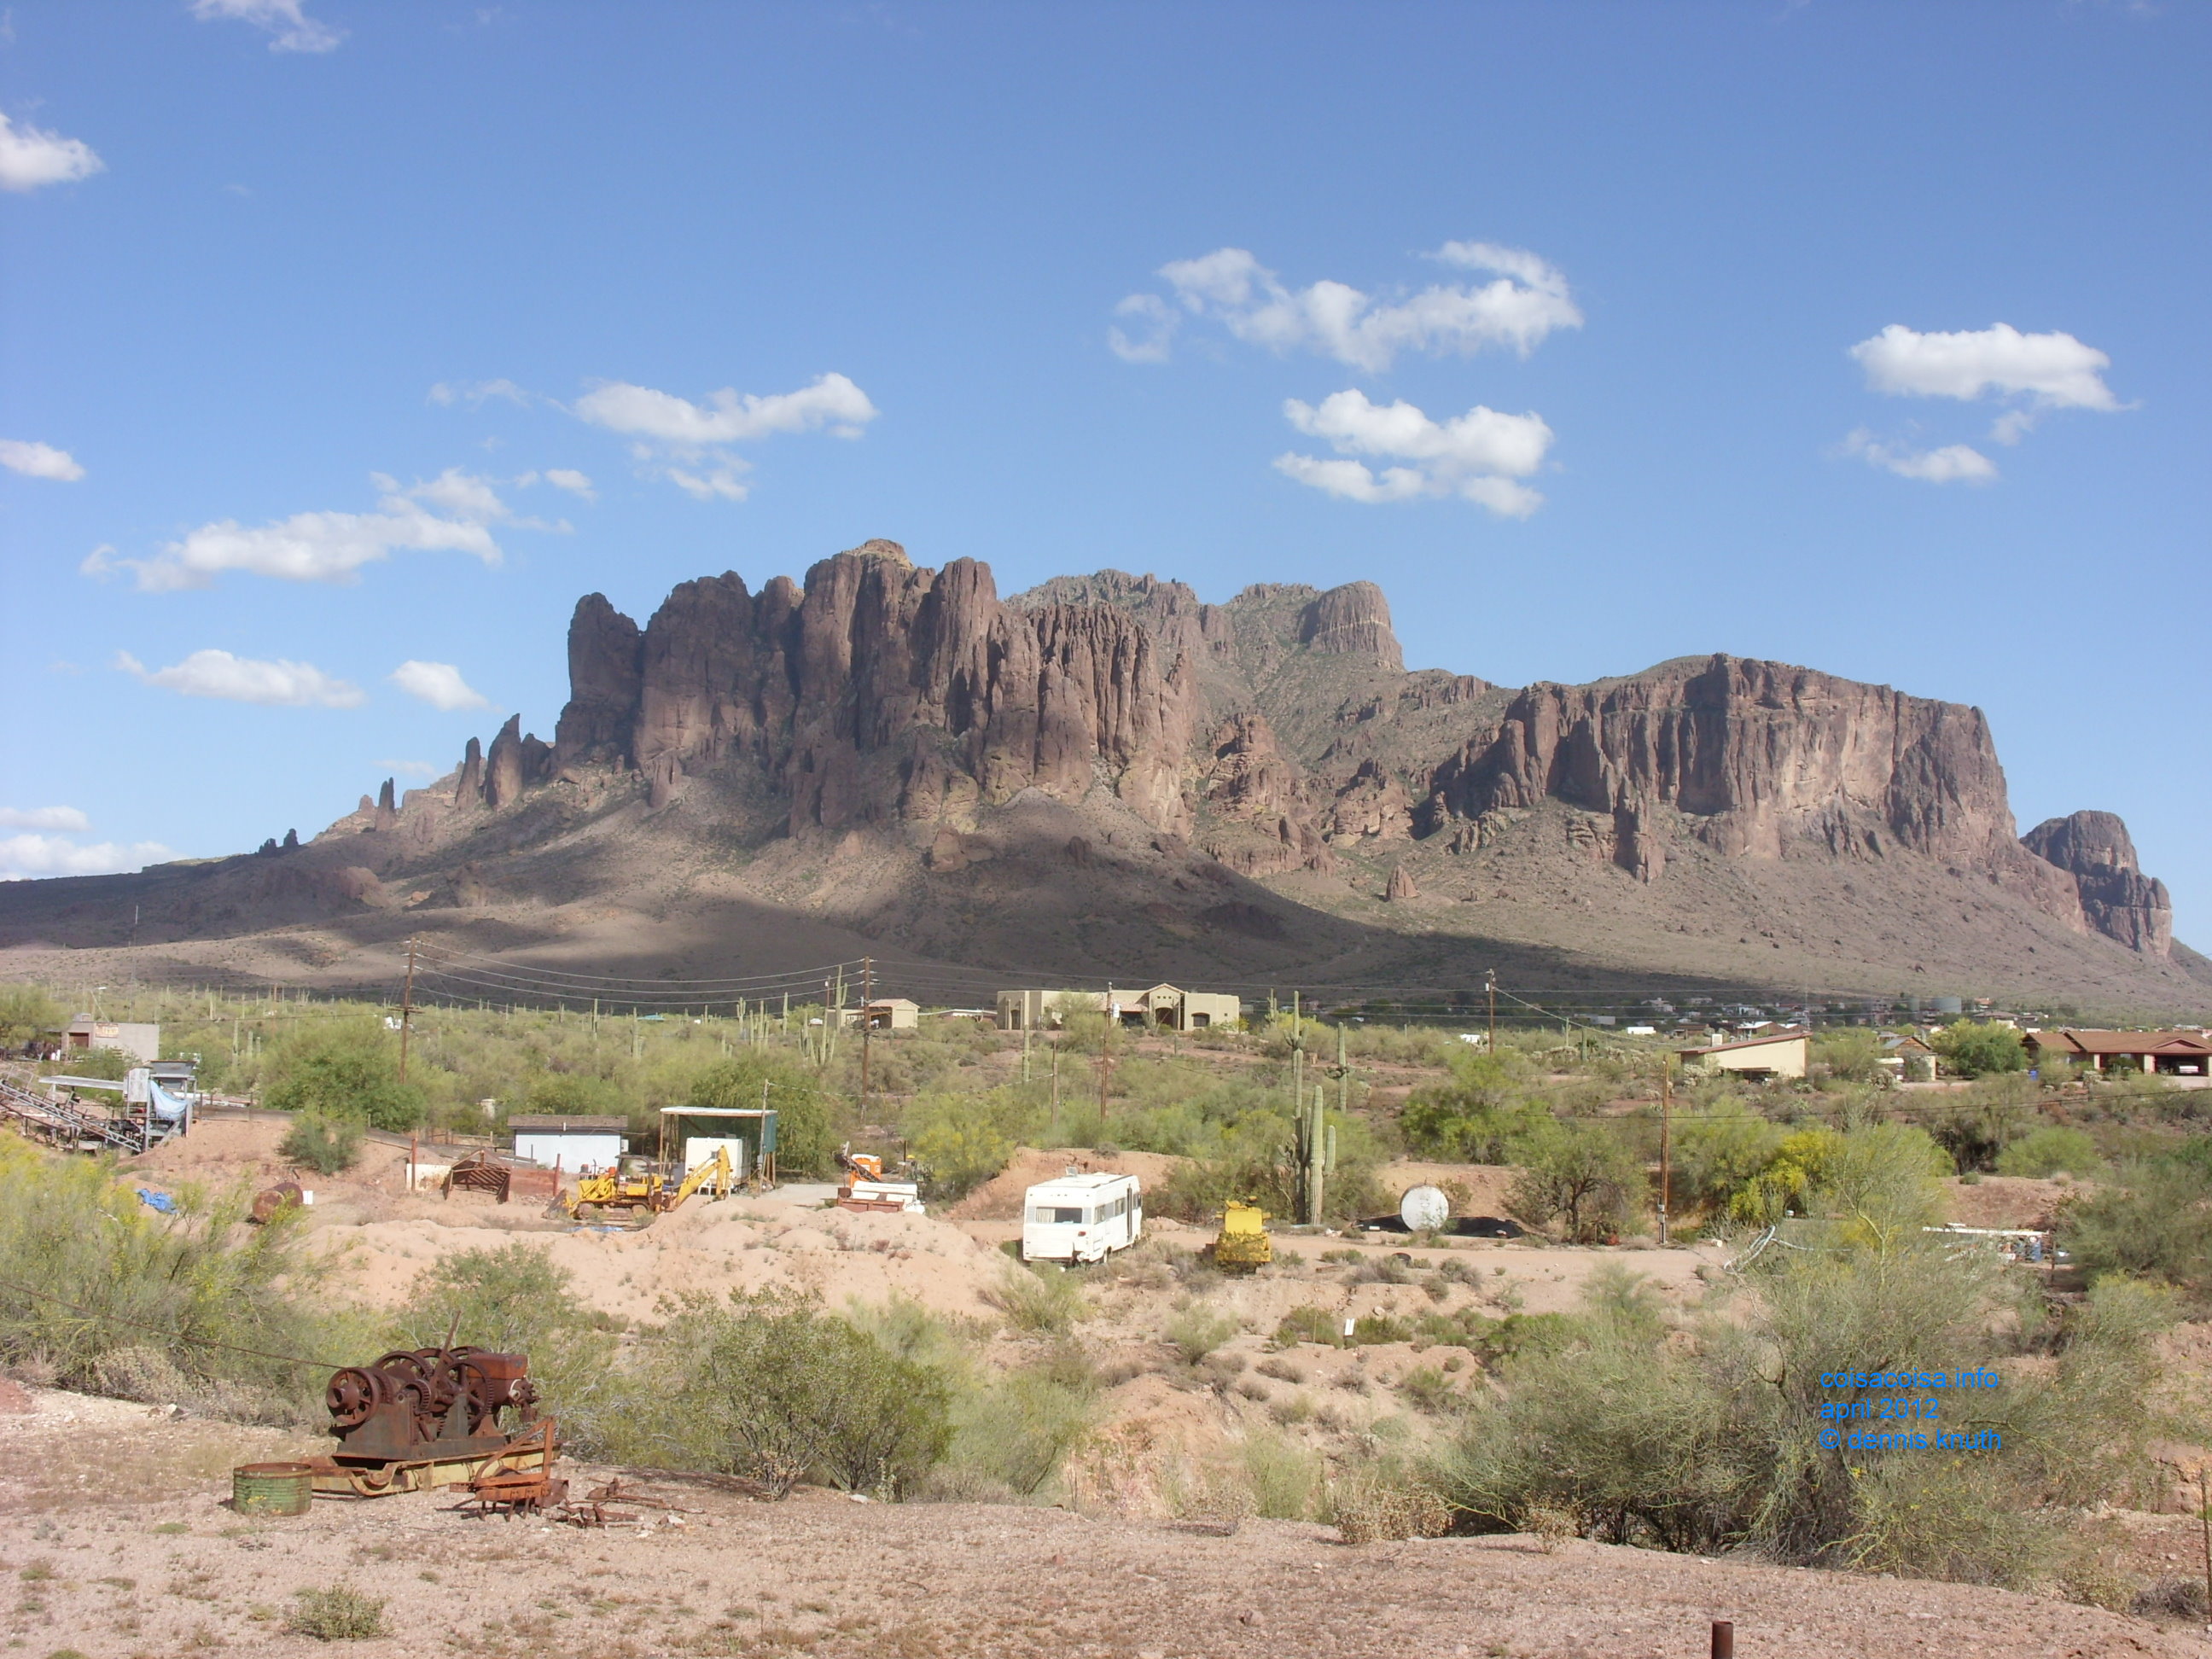 2012_04_26_e_apache_junction_ghost_town_0016.jpg (large)